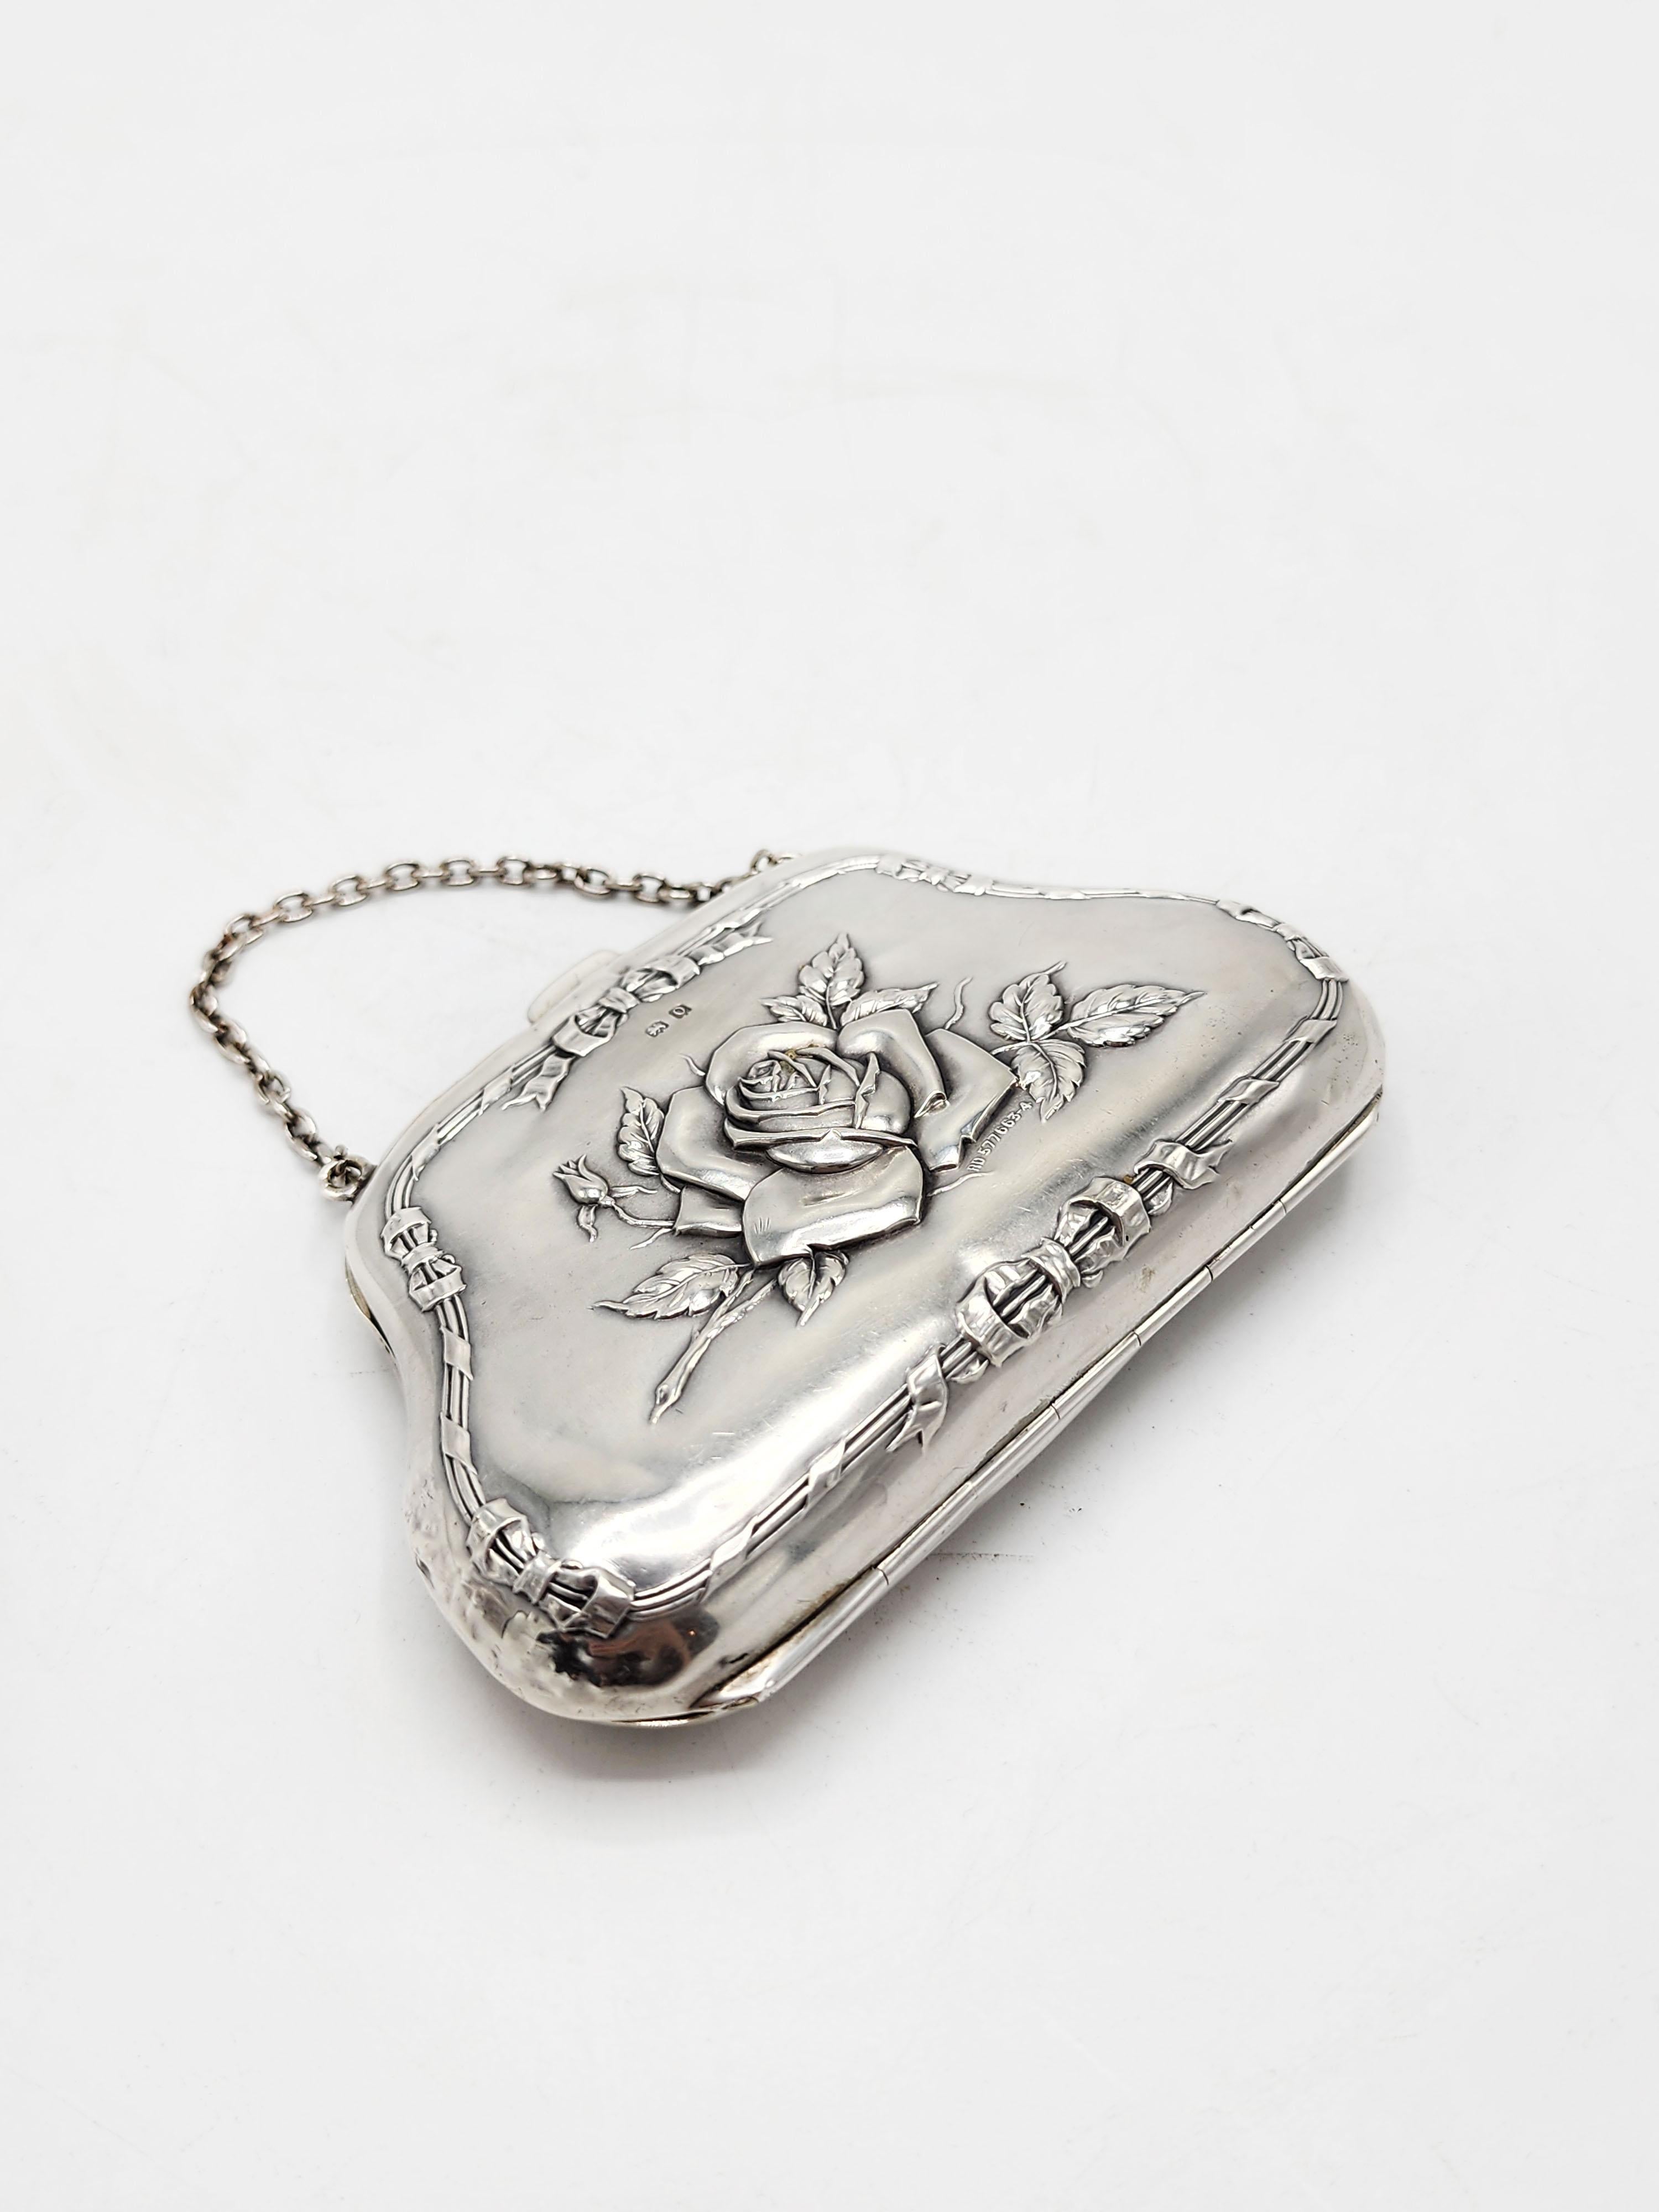 20th century sterling silver handbag-shaped box
Beautiful decorative silver box, with a central design of a rose and a frame of bows on both sides. Sealed
Measures:
Height: 7.5 centimeters
Length: 11 centimeters